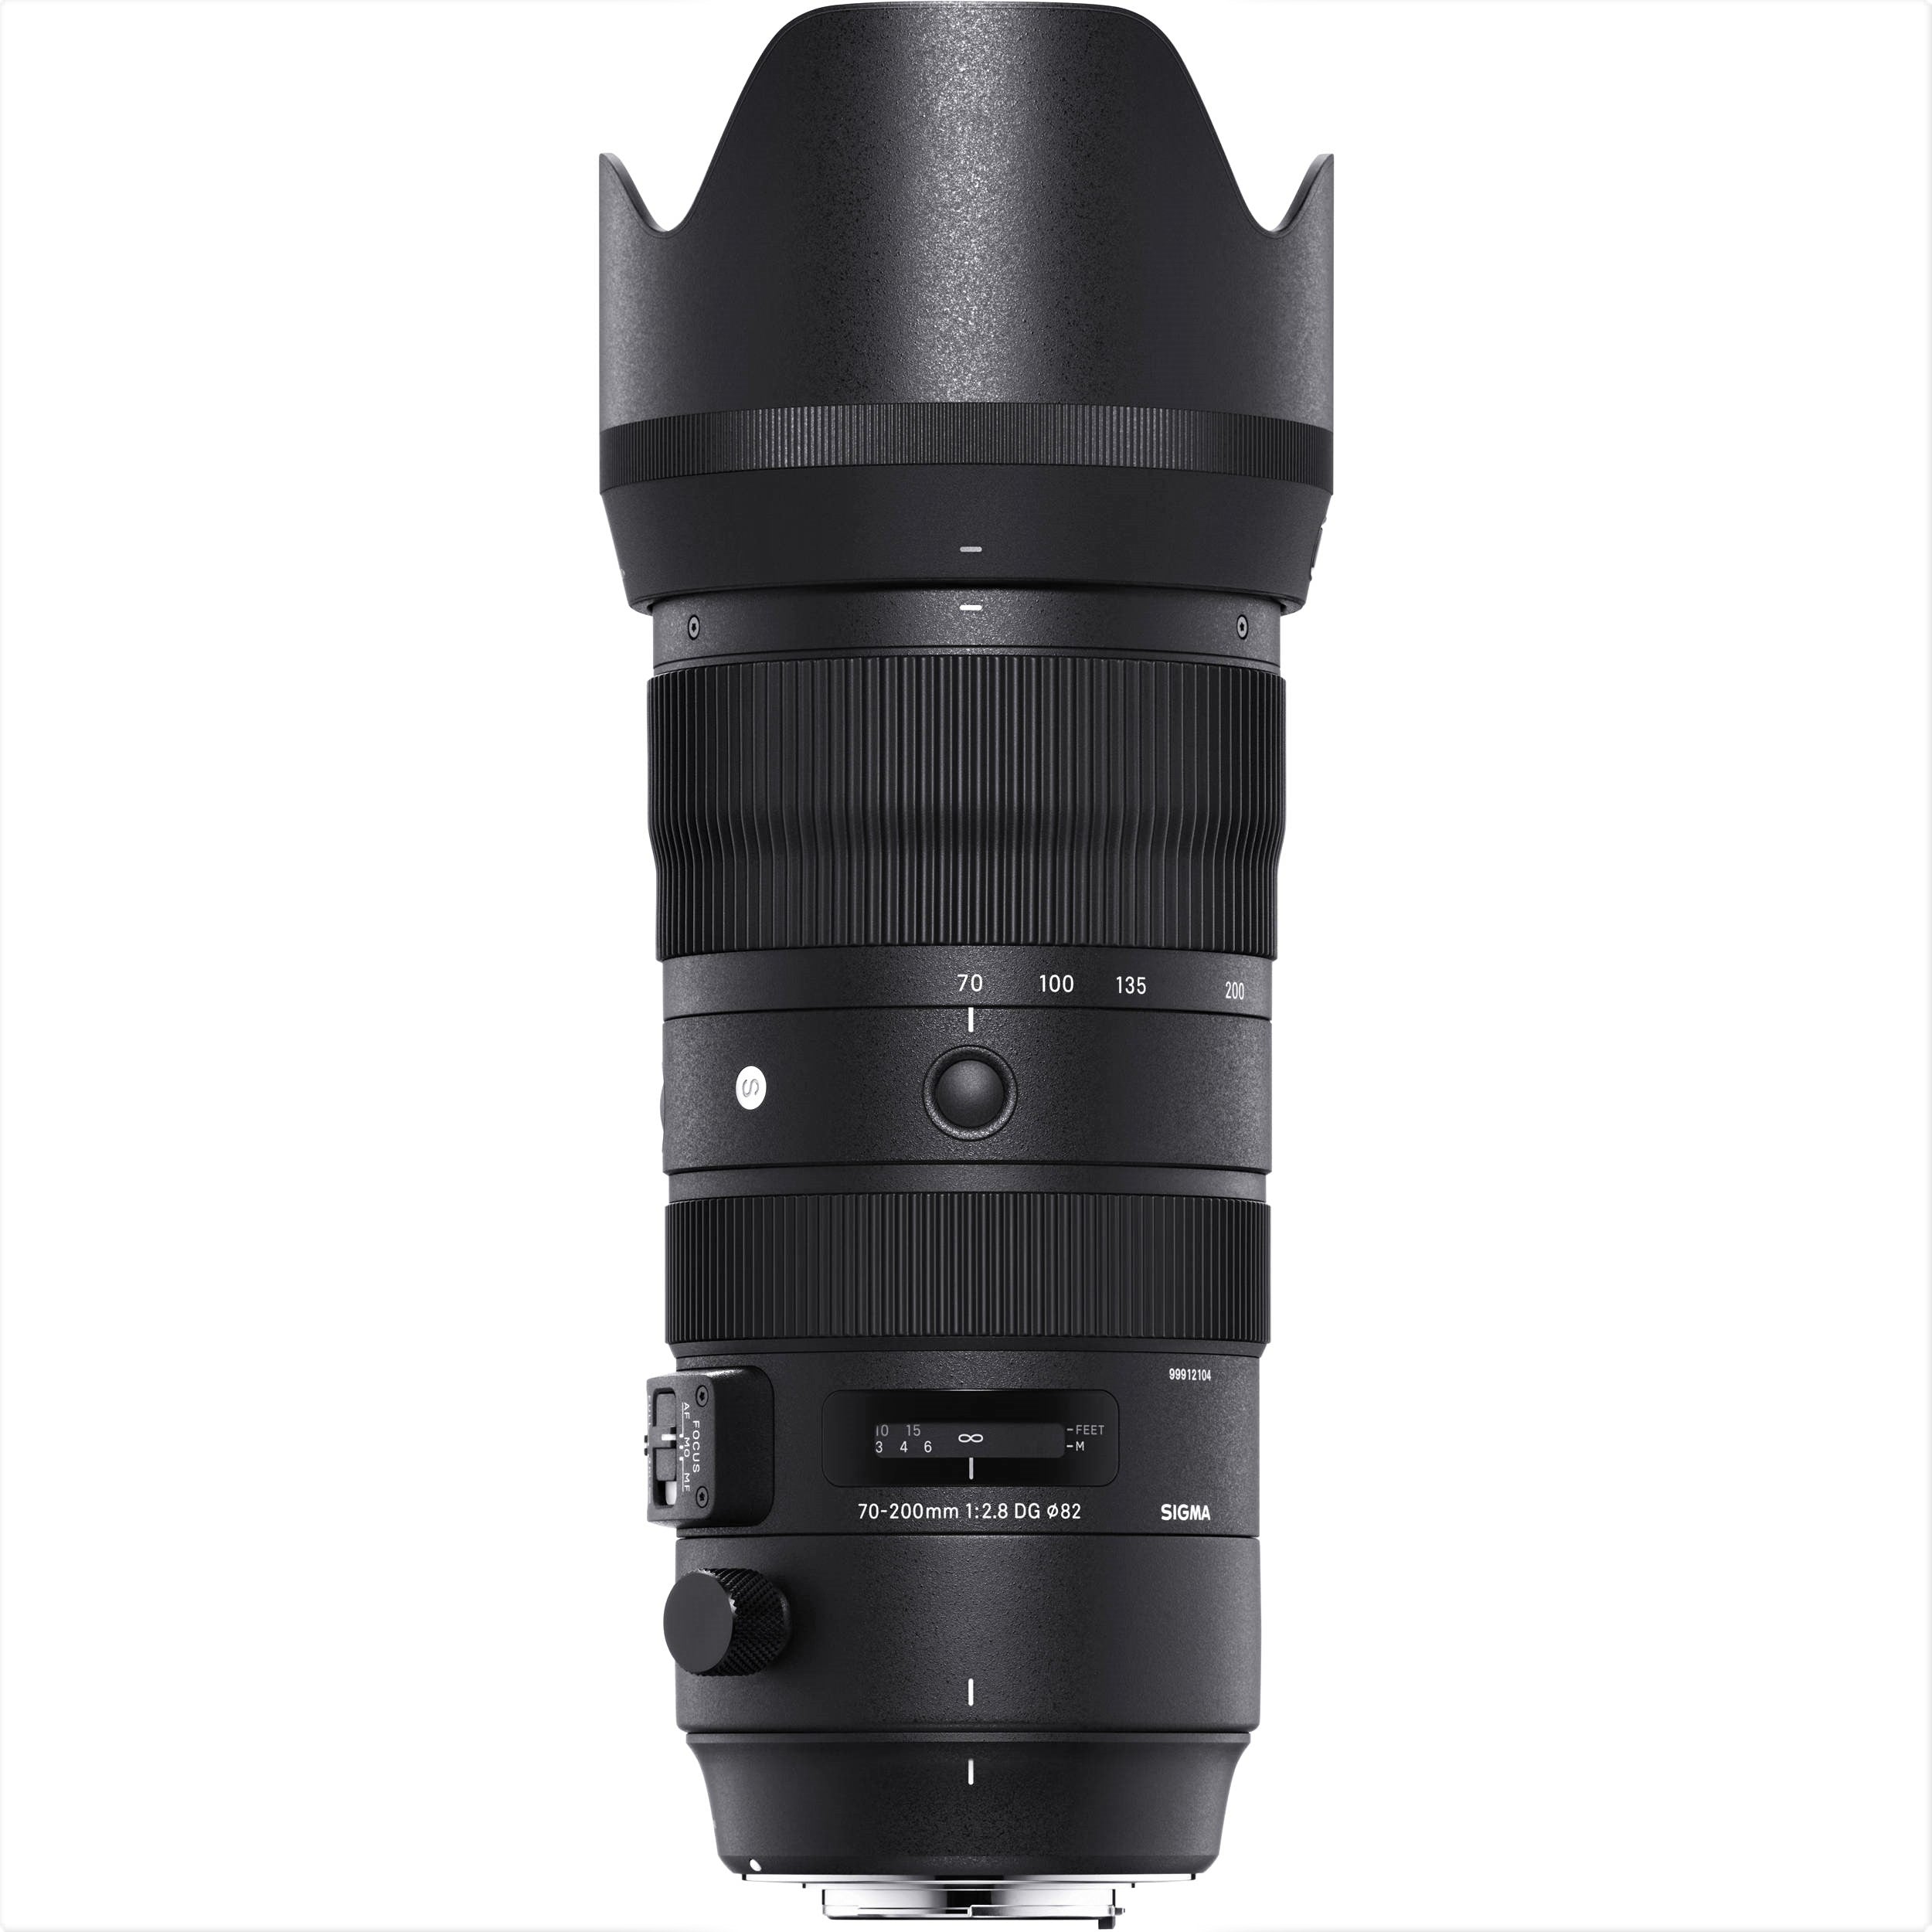 Sigma 70-200mm F2.8 DG OS HSM Sports Lens (Sigma SA Mount) with Attached Lens Hood on the Top